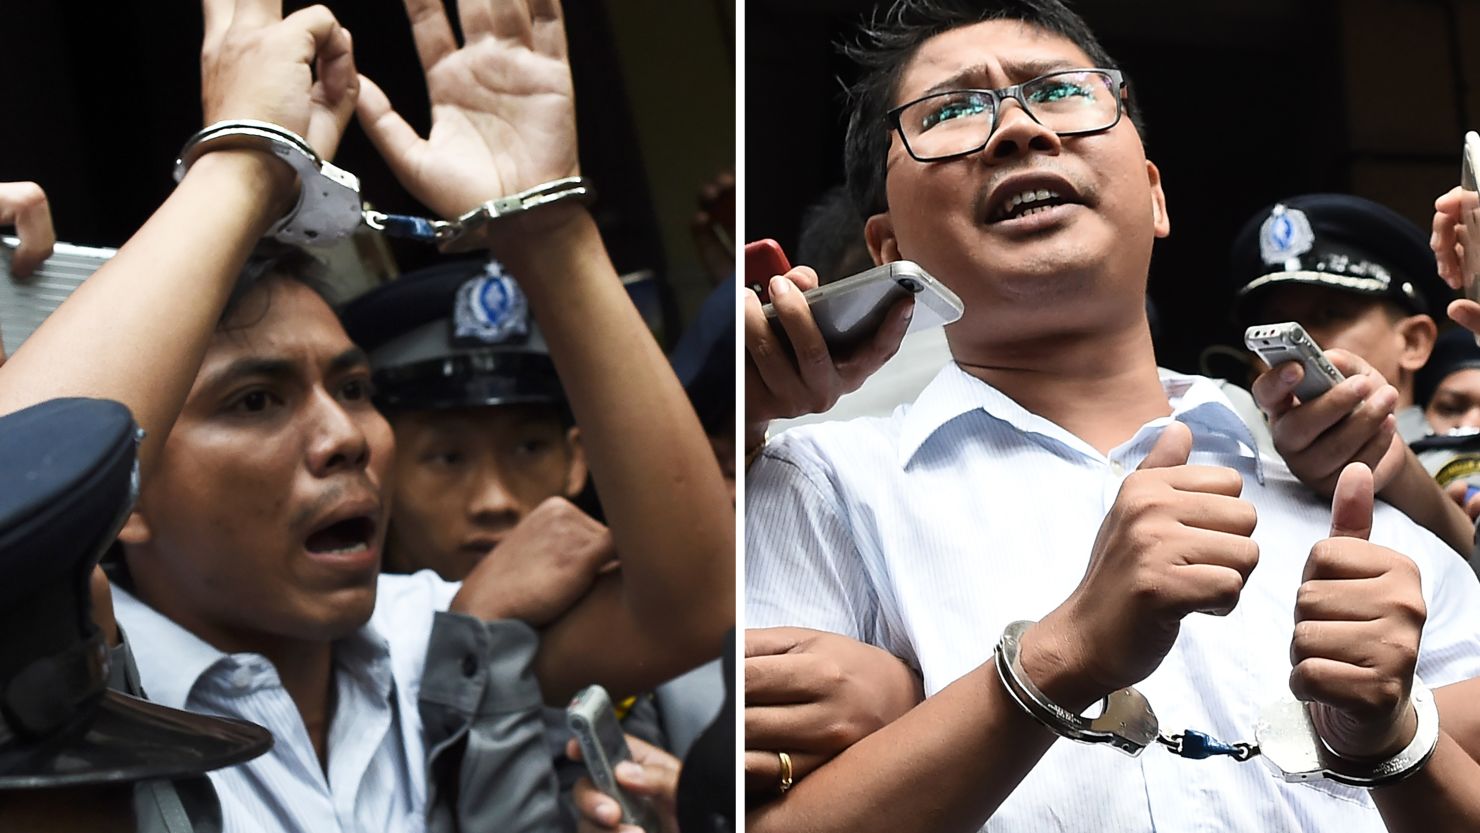 journalists Kyaw Soe Oo (L) and Wa Lone (R) are escorted by police after their sentencing by a court to jail in Yangon on September 3, 2018. 